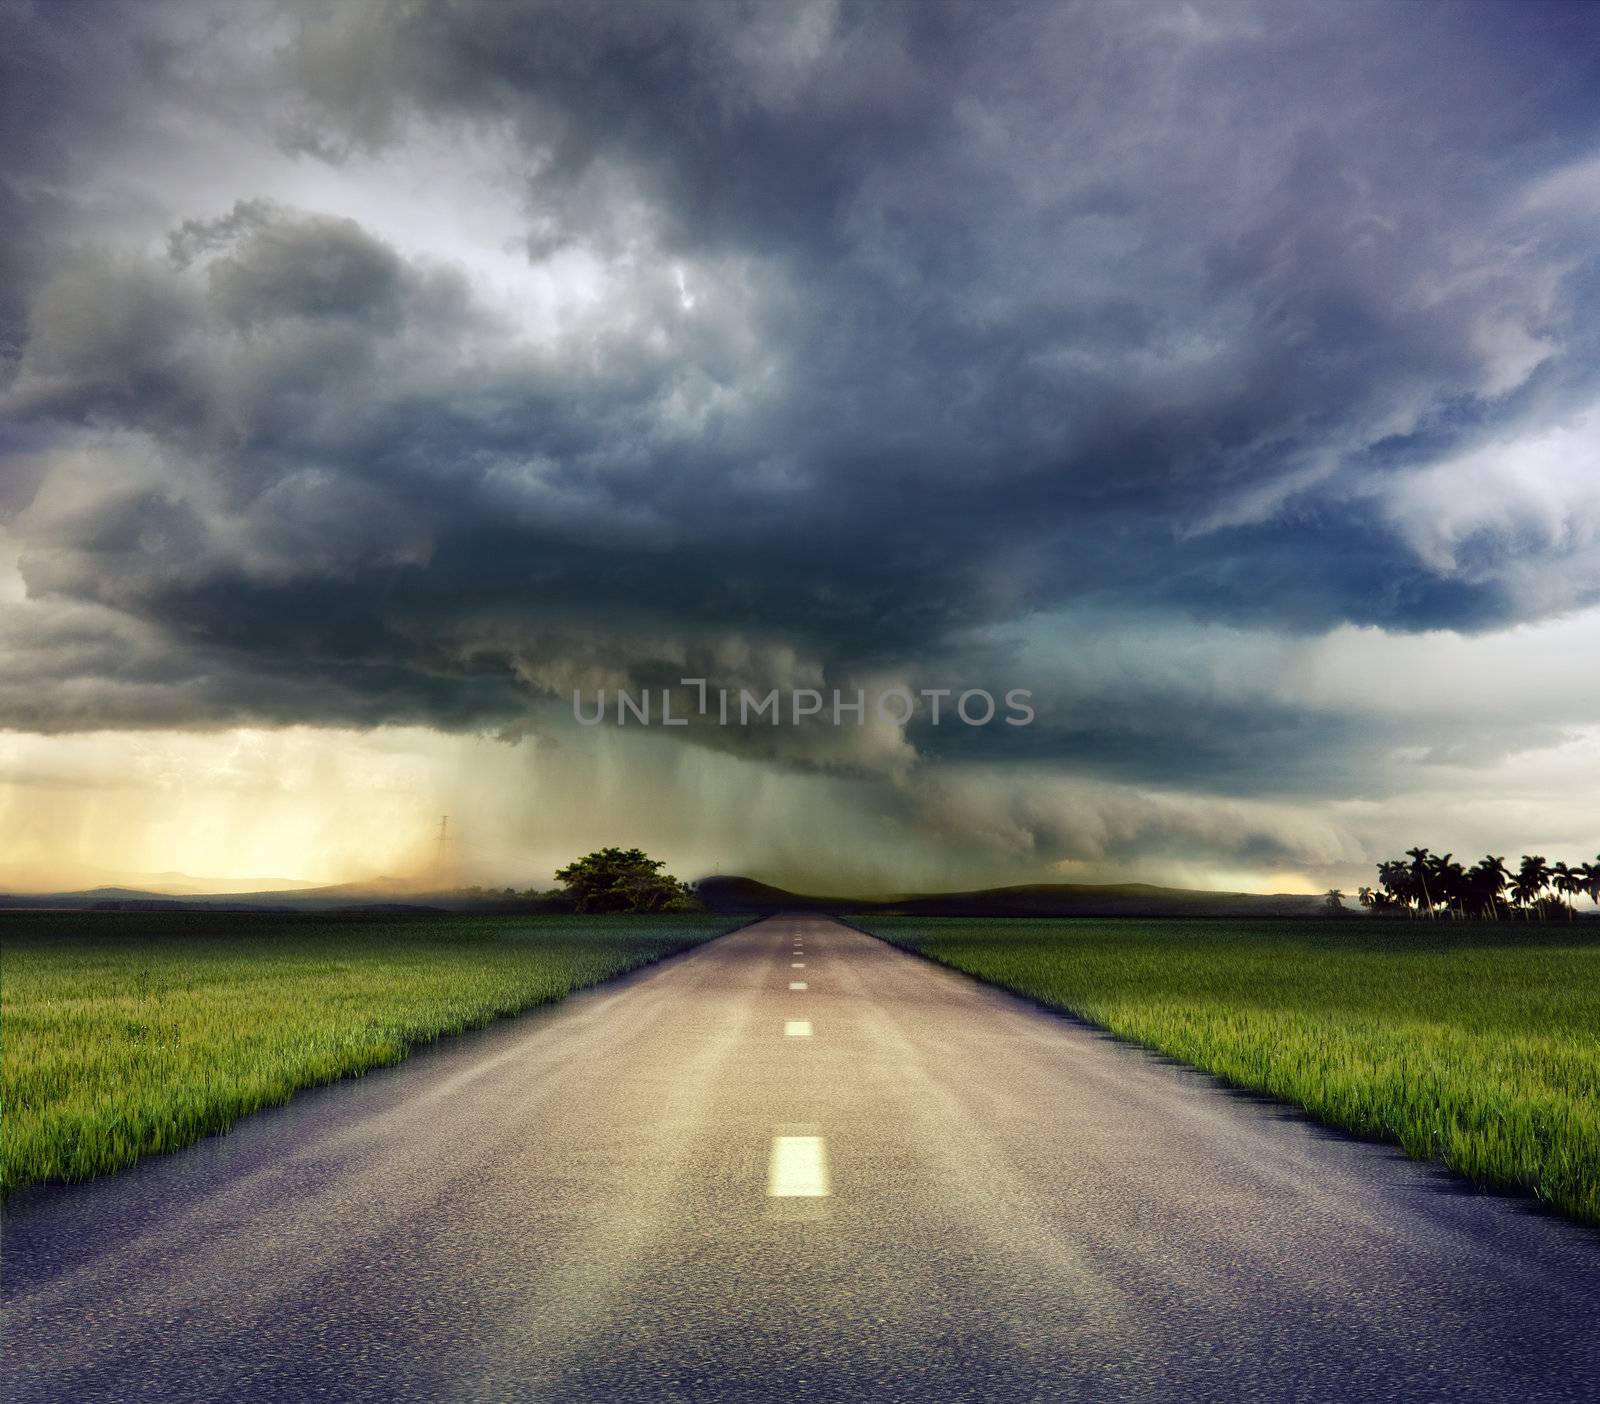 the road to storm ( photo compilation. The grain and texture added. ) 